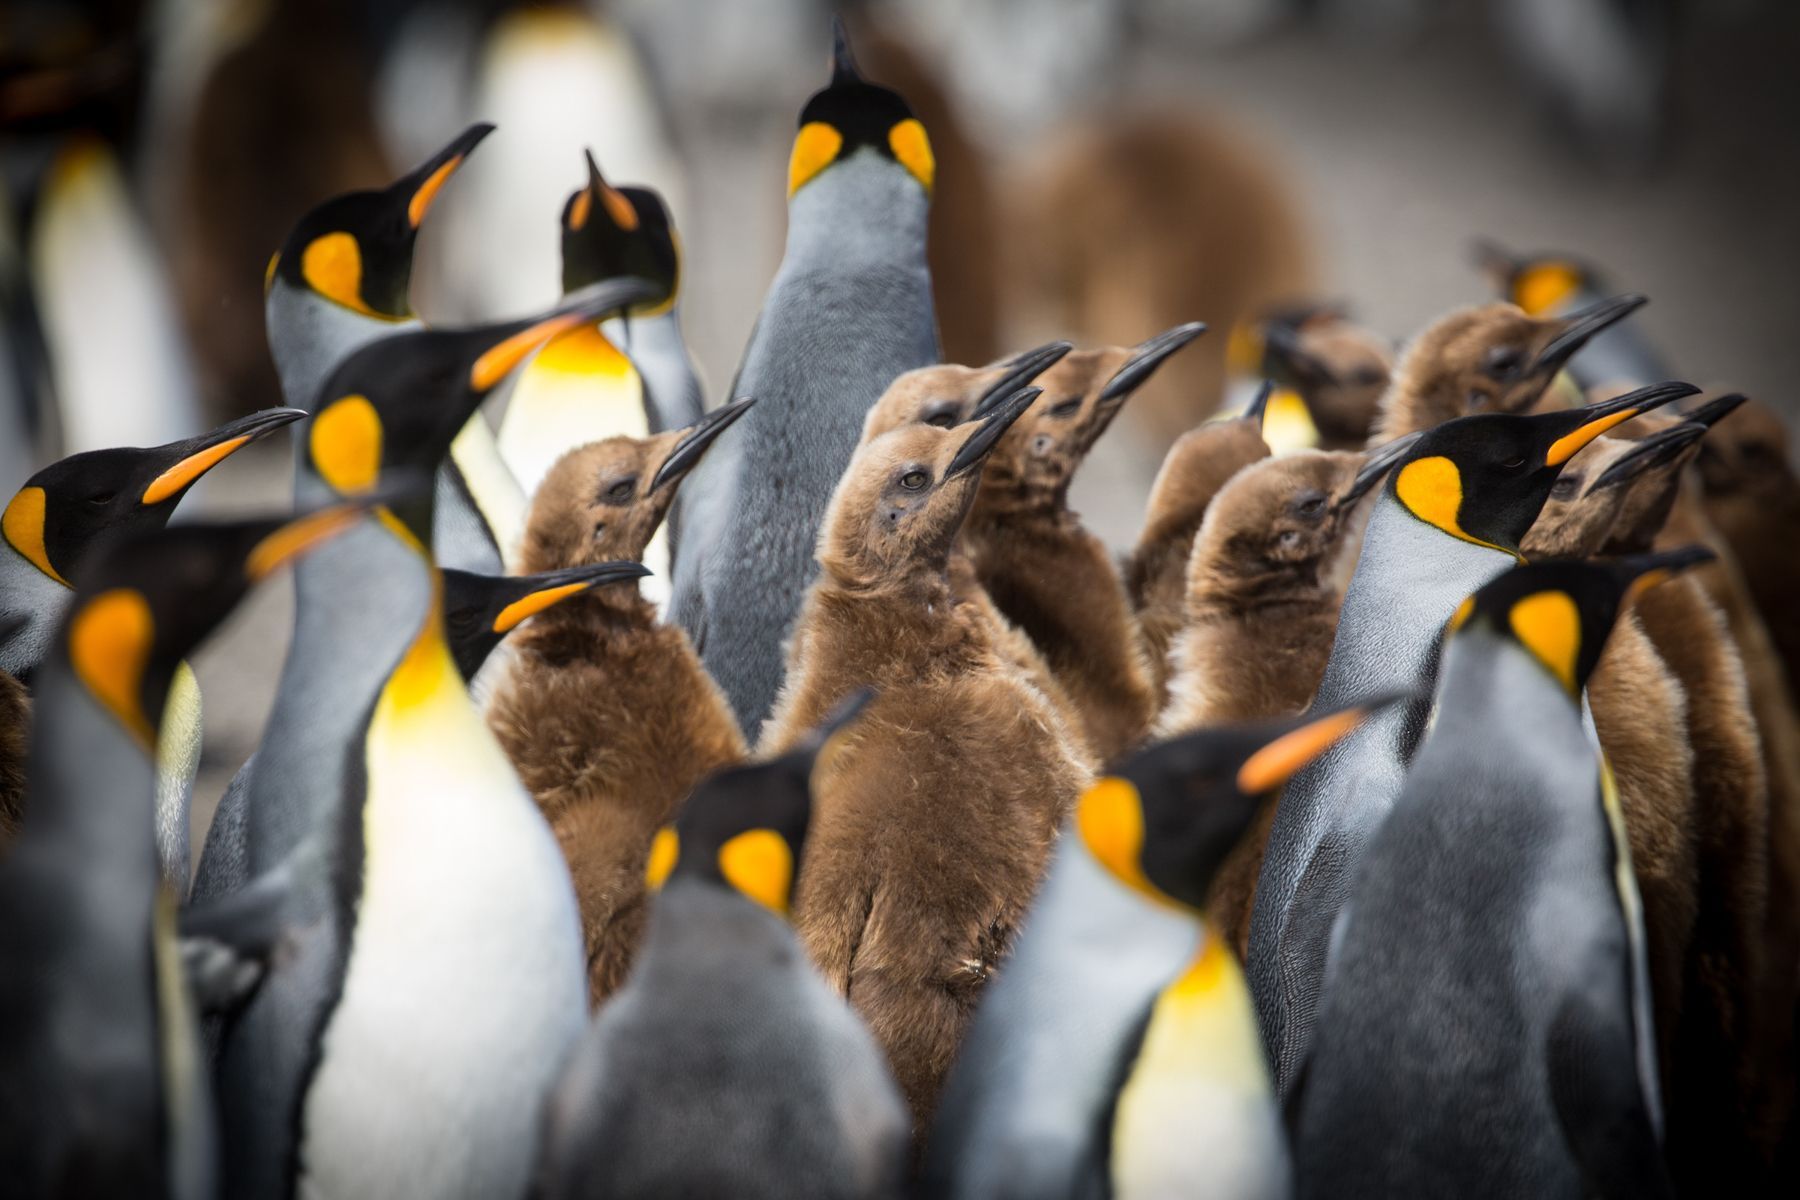 A King Penguin colony is surely one of the most evocative wildlife spectaclese